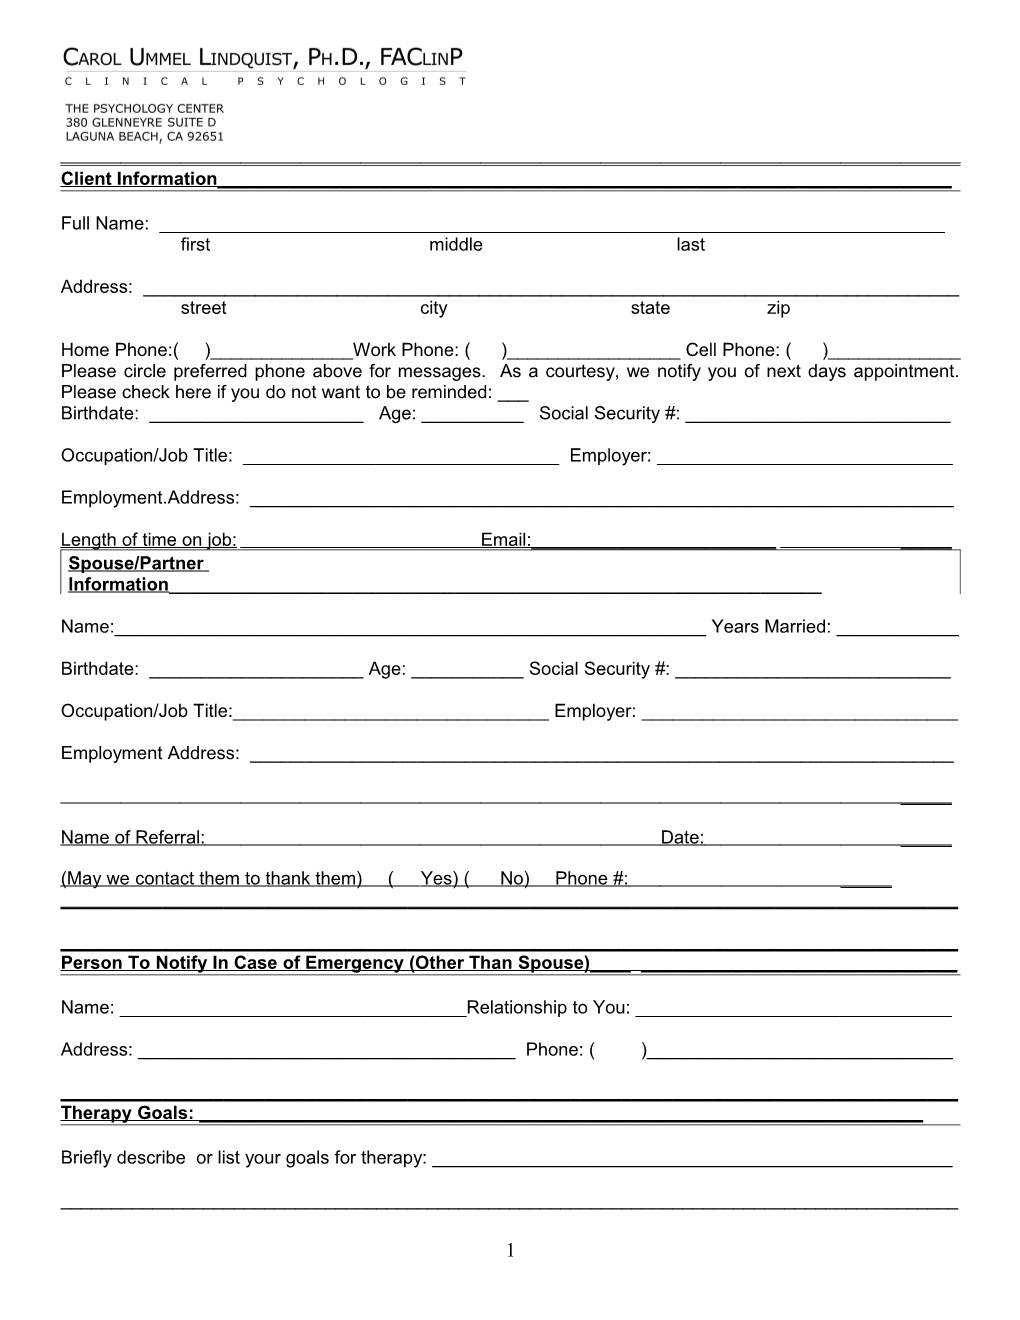 Revised New Client Forms